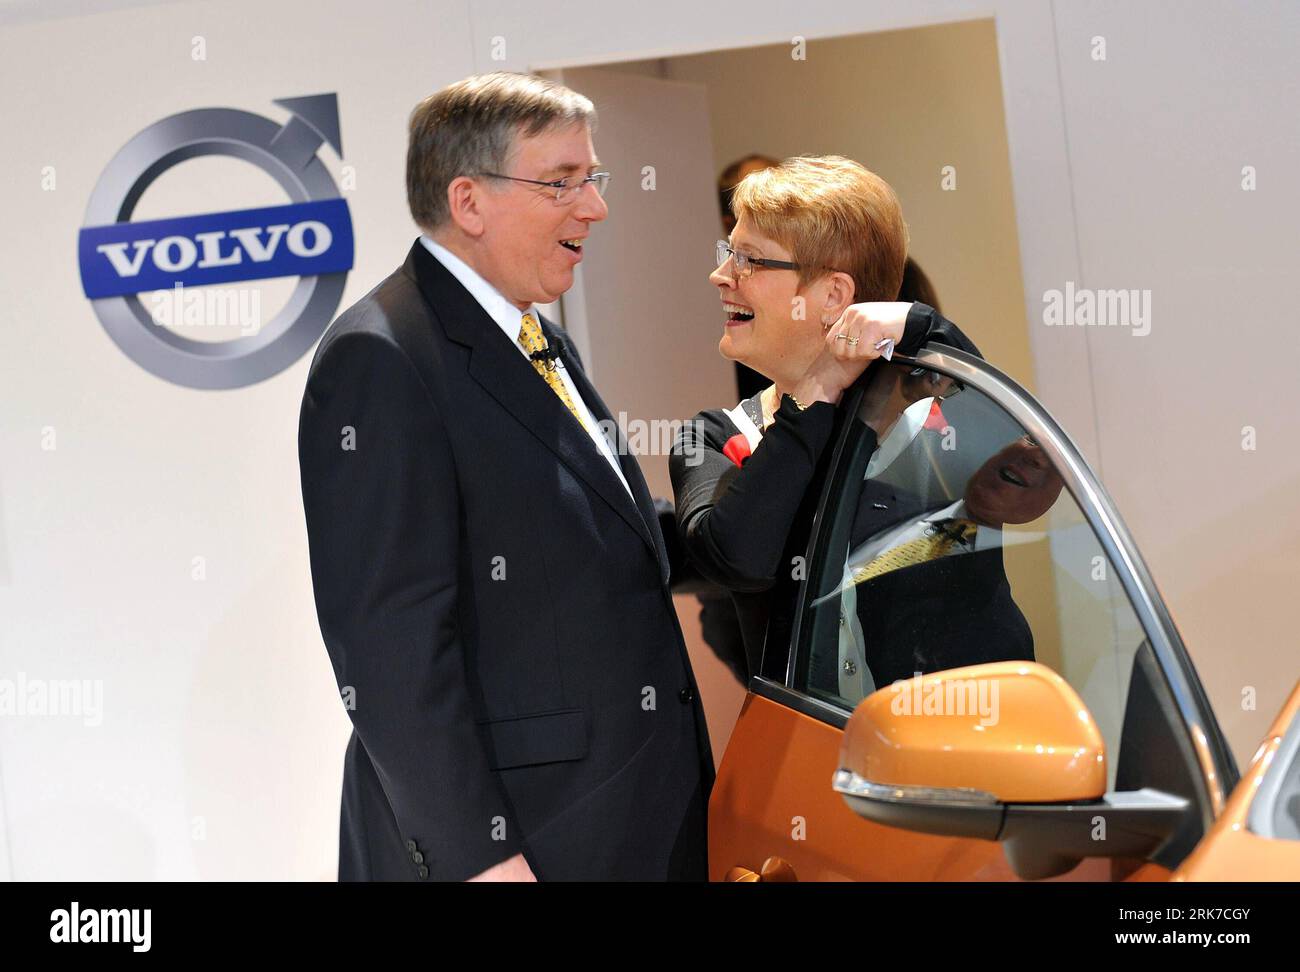 Bildnummer: 53899894  Datum: 28.03.2010  Copyright: imago/Xinhua (100328) -- GOTEBORG, March 28, 2010 (Xinhua) -- Lewis Booth (L), CFO of Ford Motor Company, talks with Maud Olofsson, Swedish deputy prime minister and minister for enterprise and energy, after the signing ceremony in Goteborg of Sweden, March 28, 2010. China s Zhejiang Geely Holding Group signed a deal with Ford Motor Co. here on Sunday on the takeover of Sweden s Volvo Cars. (Xinhua/Wu Wei) (zl) (12)SWEDEN-GOTEBORG-CHINA-GEELY-DEAL-VOLVO PUBLICATIONxNOTxINxCHN Wirtschaft People Kauf Verkauf Göteborg kbdig xng 2010 quer premium Stock Photo